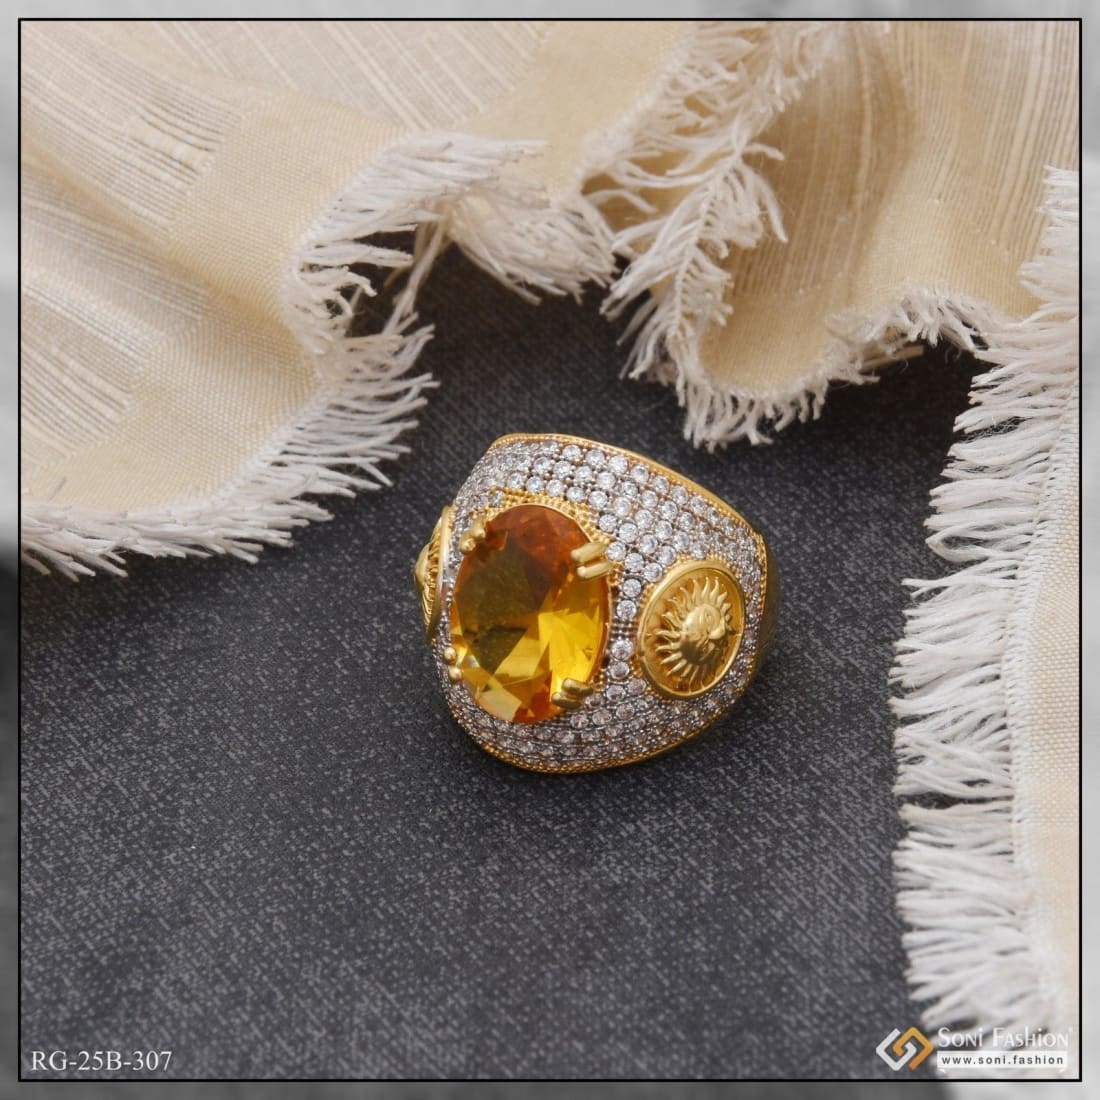 Get the Perfect Yellow Sapphire Engagement Rings | GLAMIRA.in